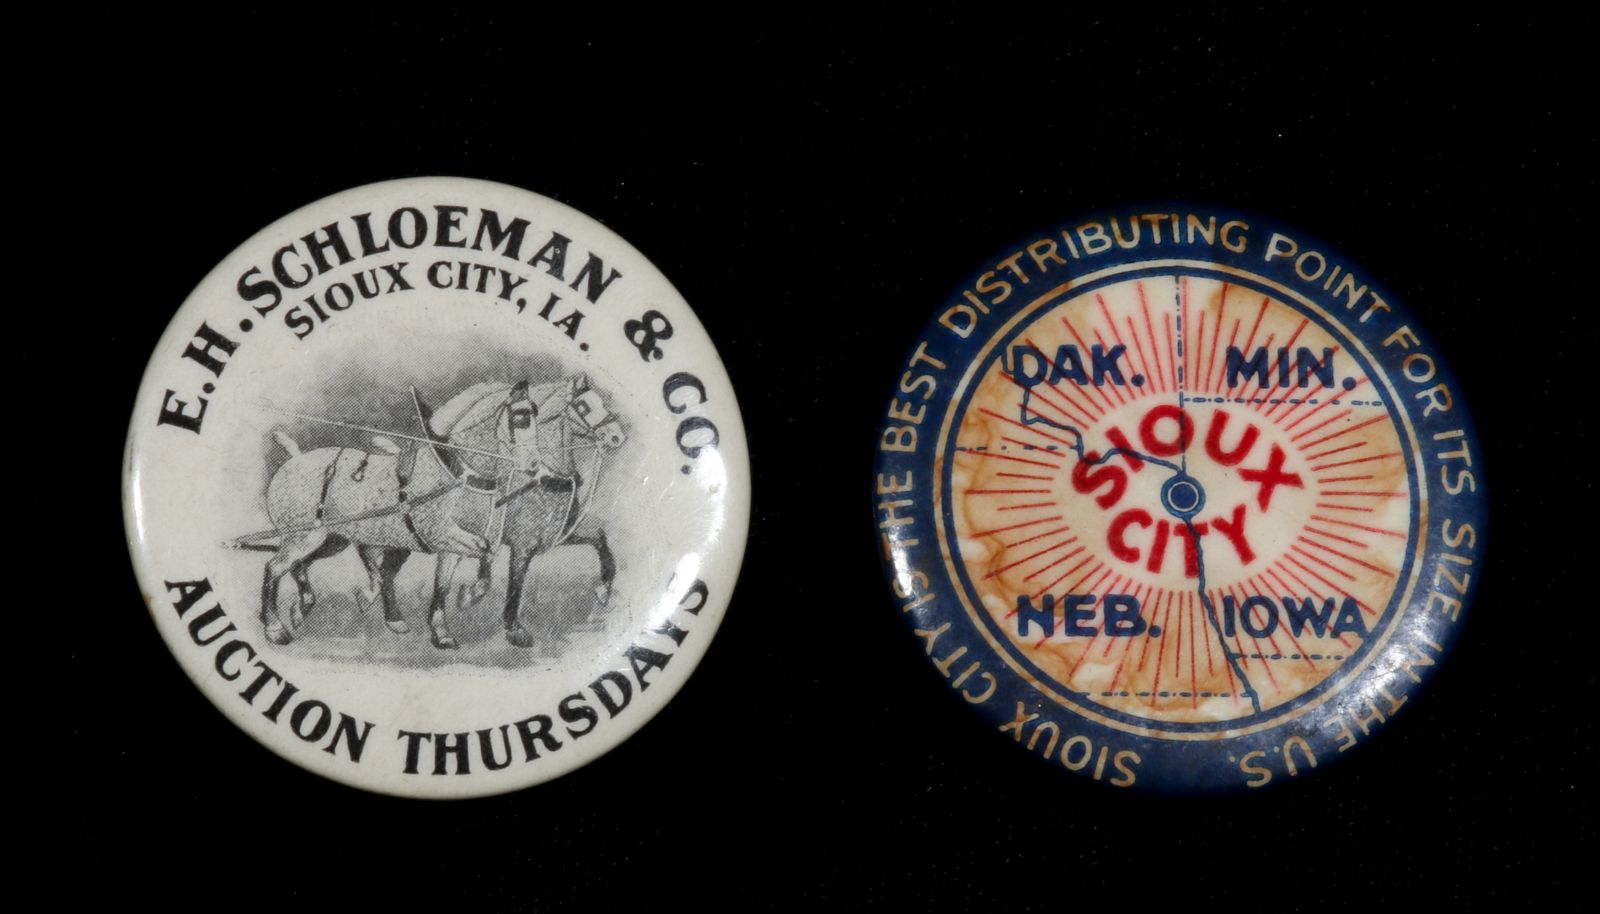 SIOUX CITY LIVESTOCK ADVERTISING BUTTONS C. 1900